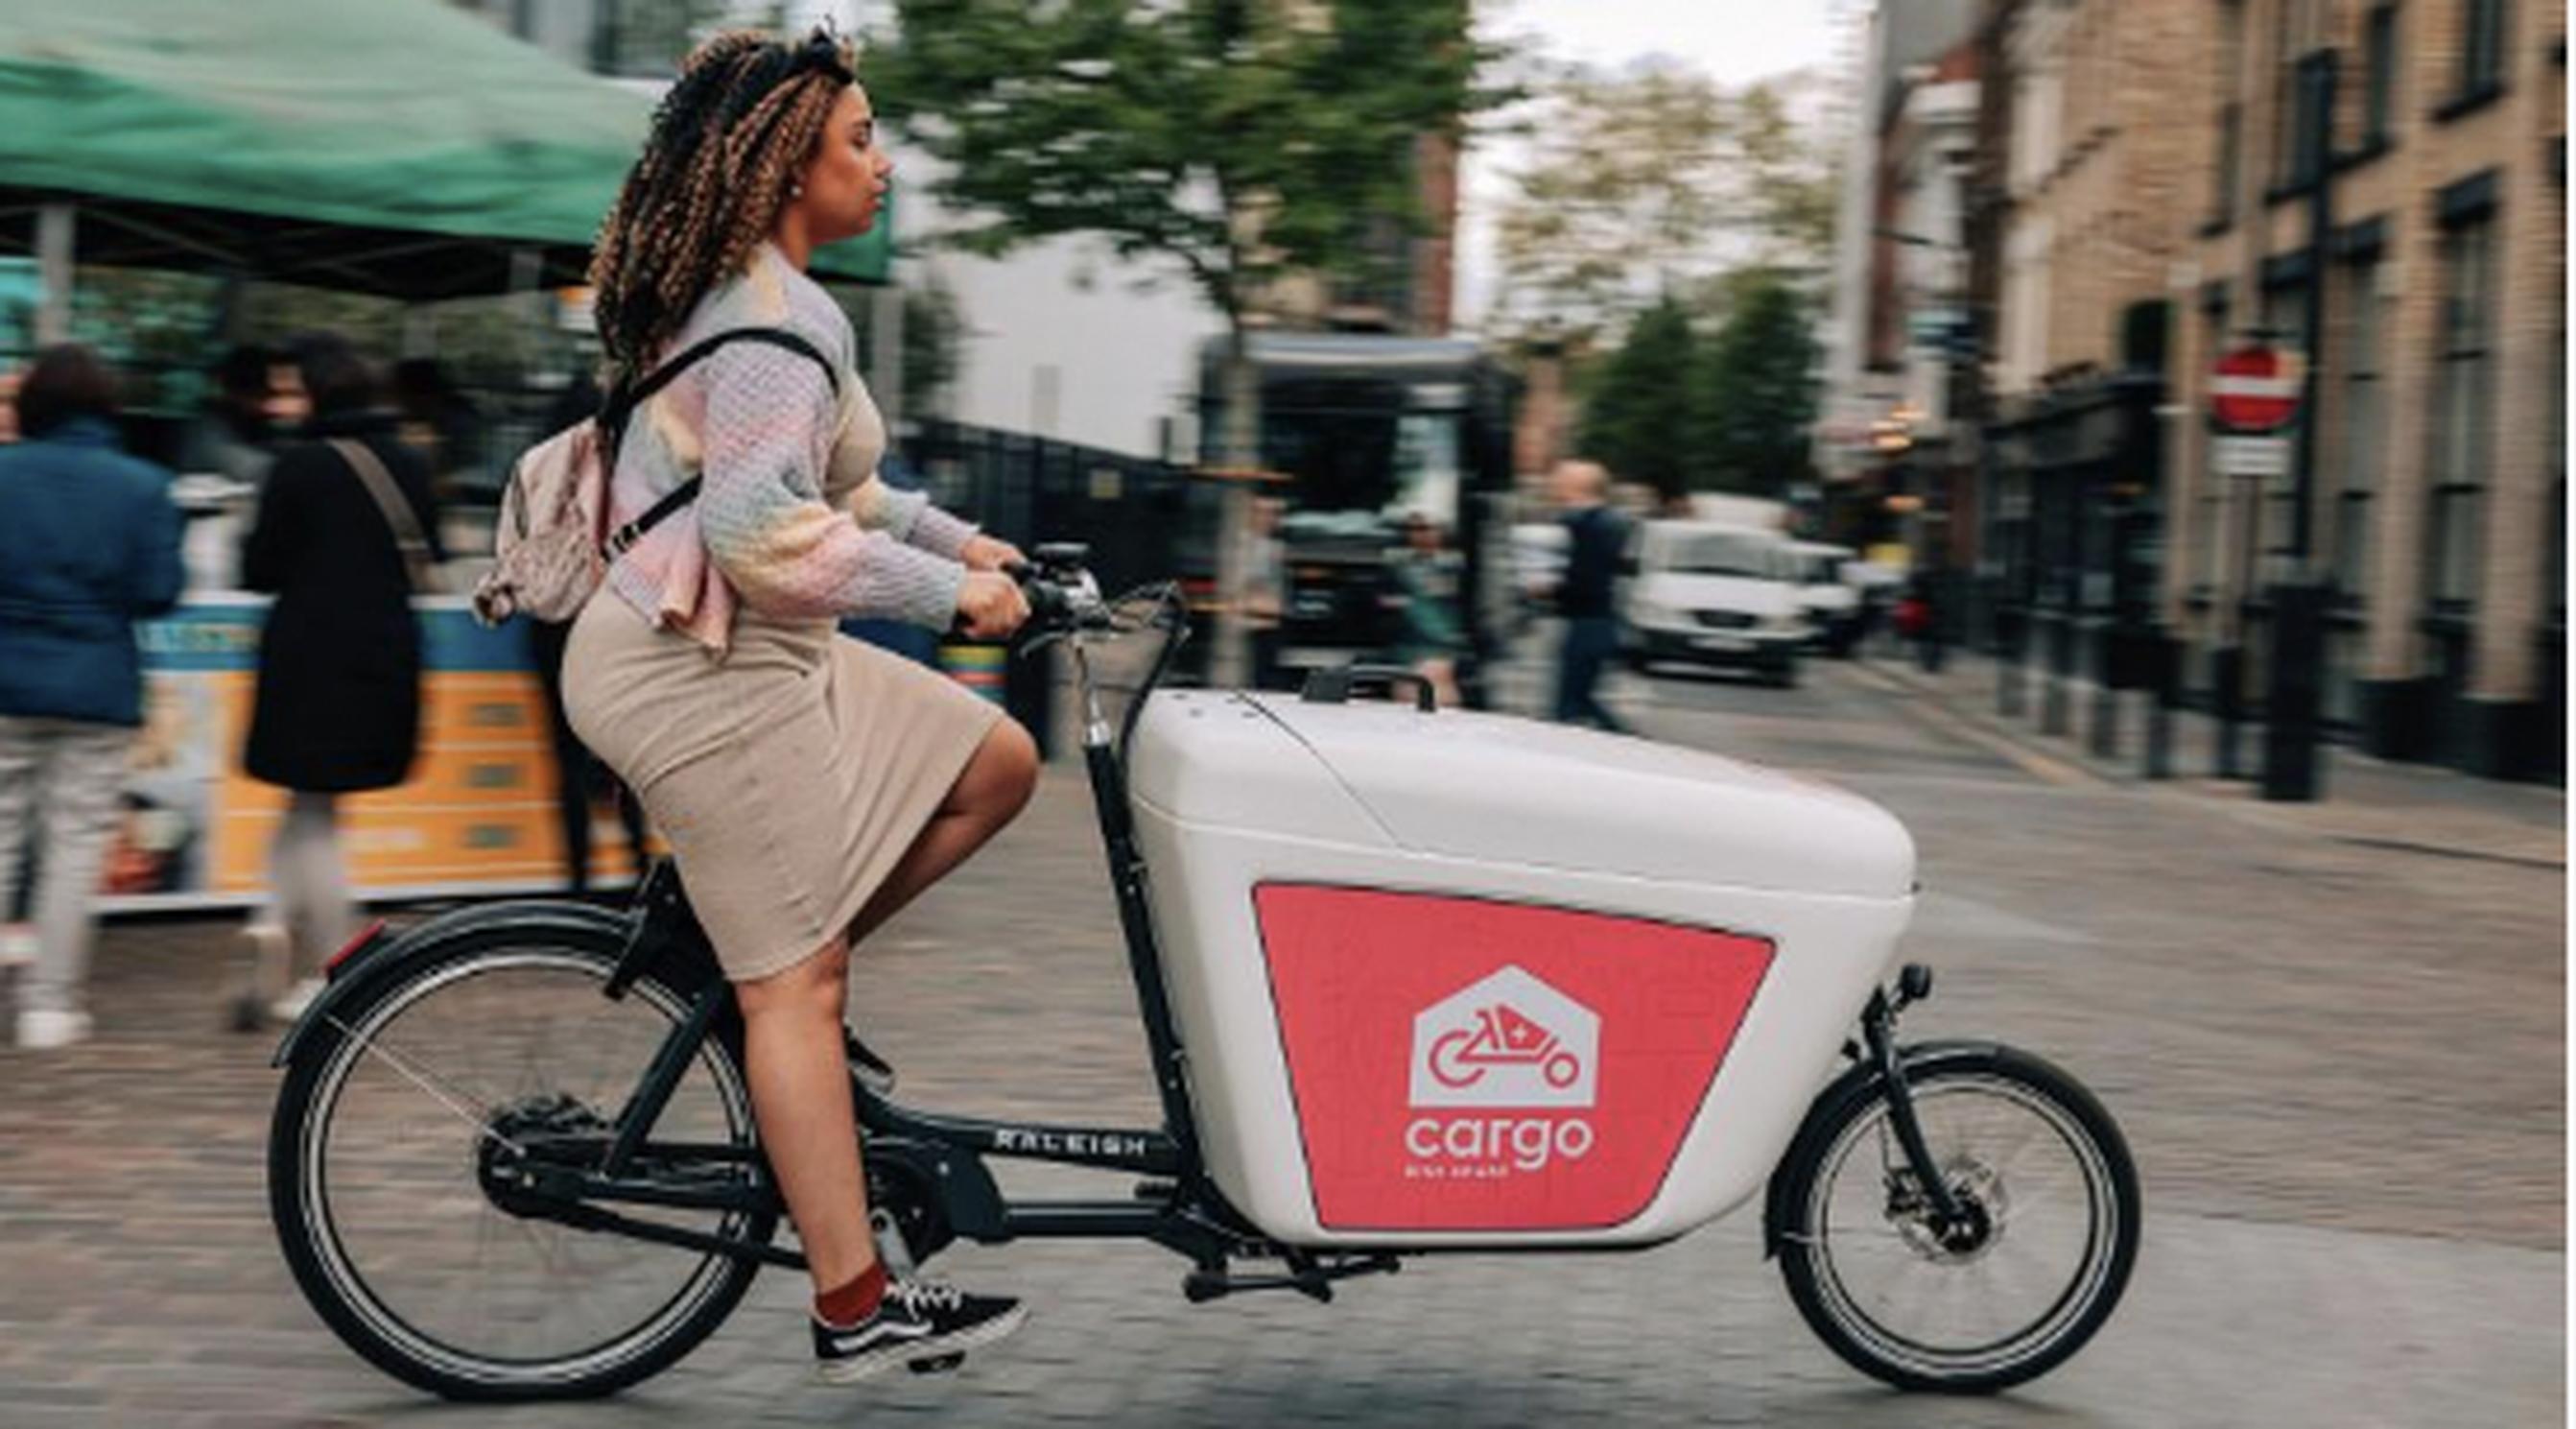 Beryl has already made eight electrically assisted cargo bikes available to hire from four hubs across Hackney